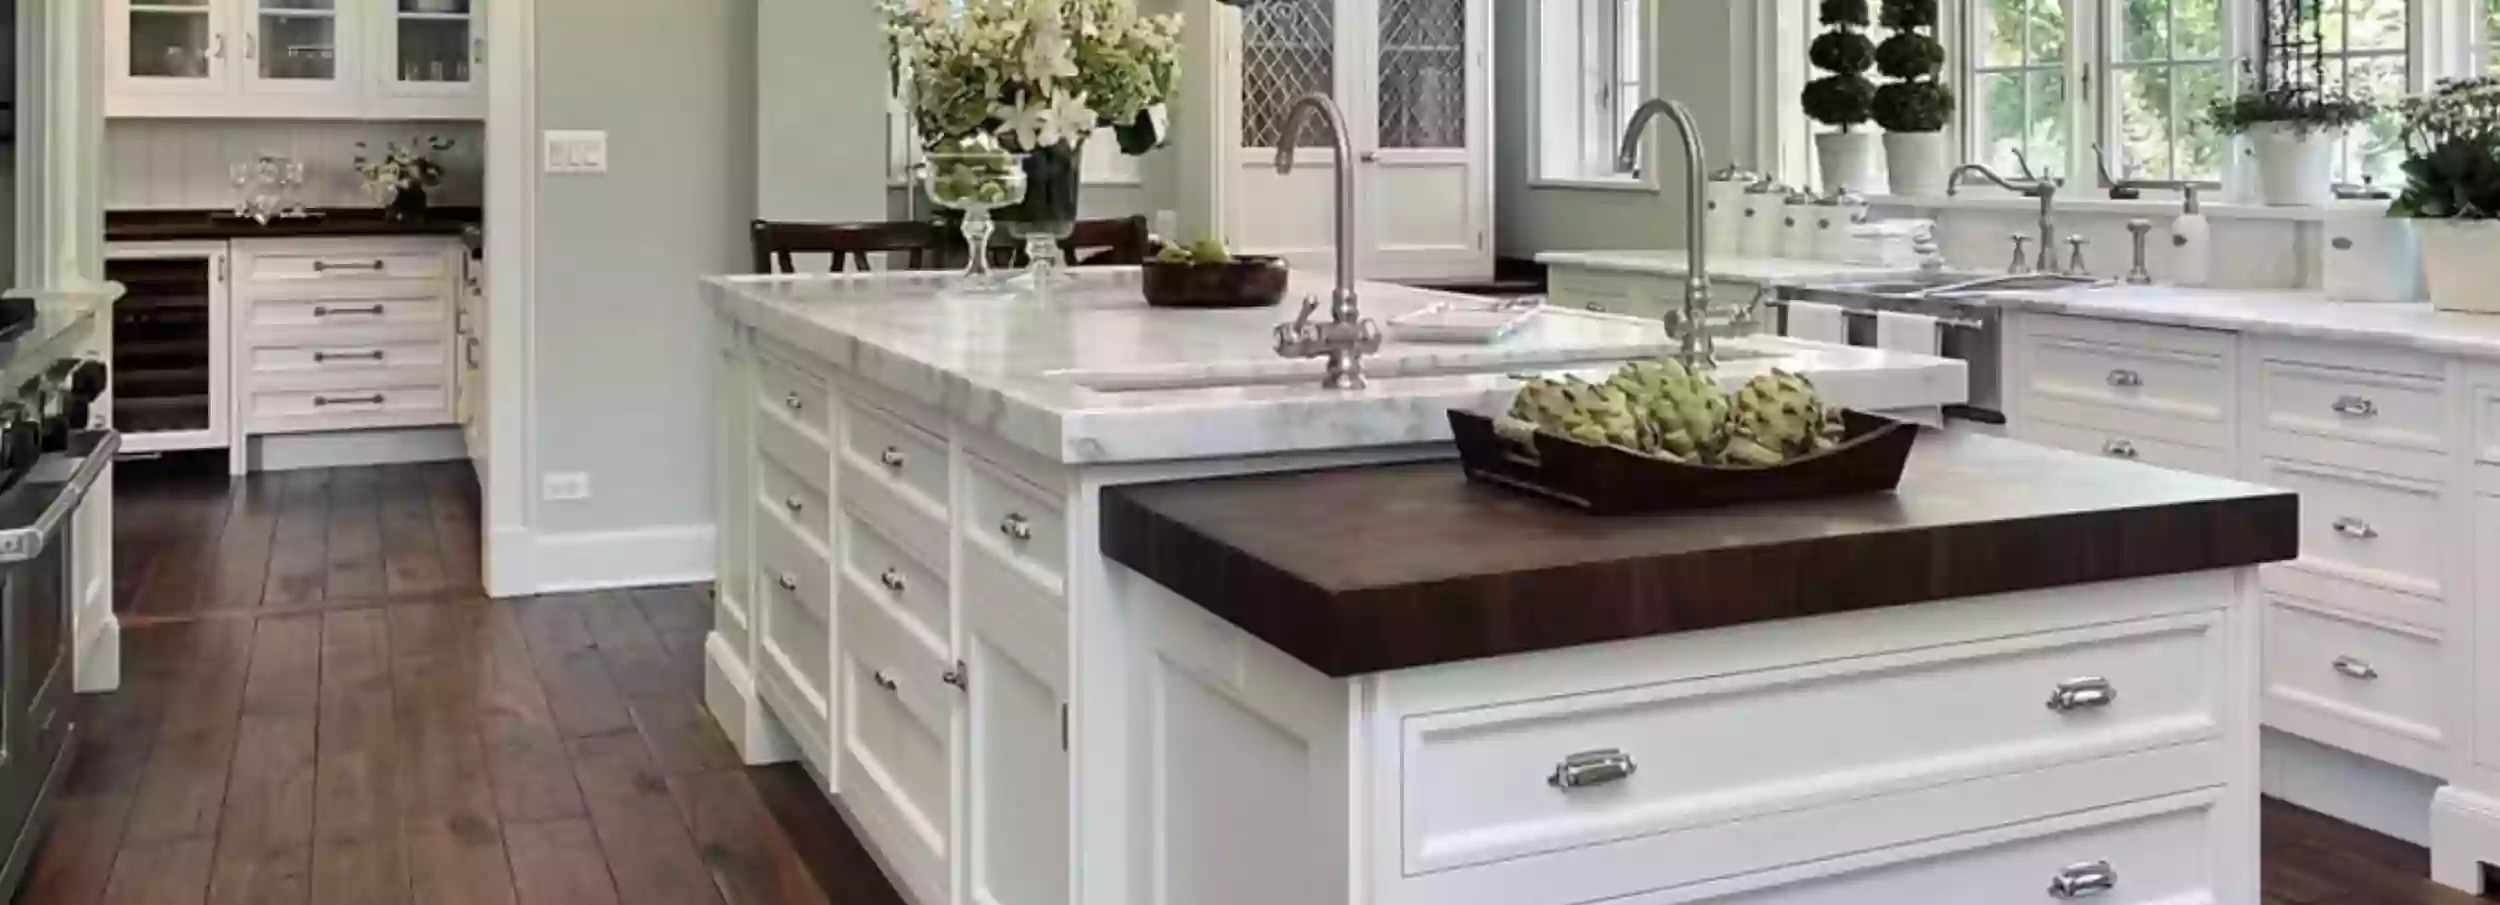 Kitchen with white counters painted by Five Star painting with black countertops and greenery.